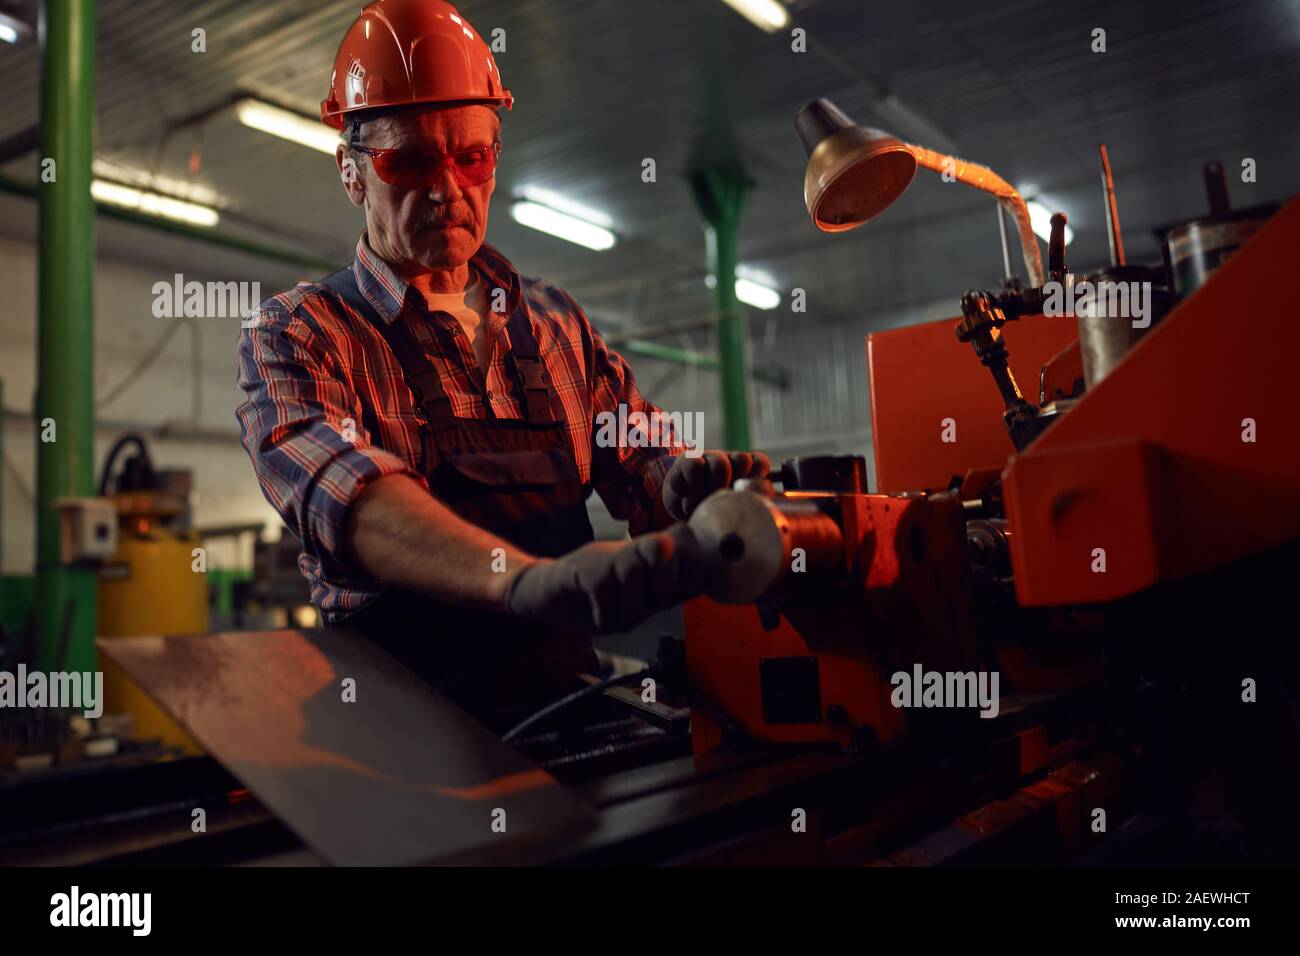 Serious mature manual worker in protective work wear standing at the lathe and making metal details Stock Photo